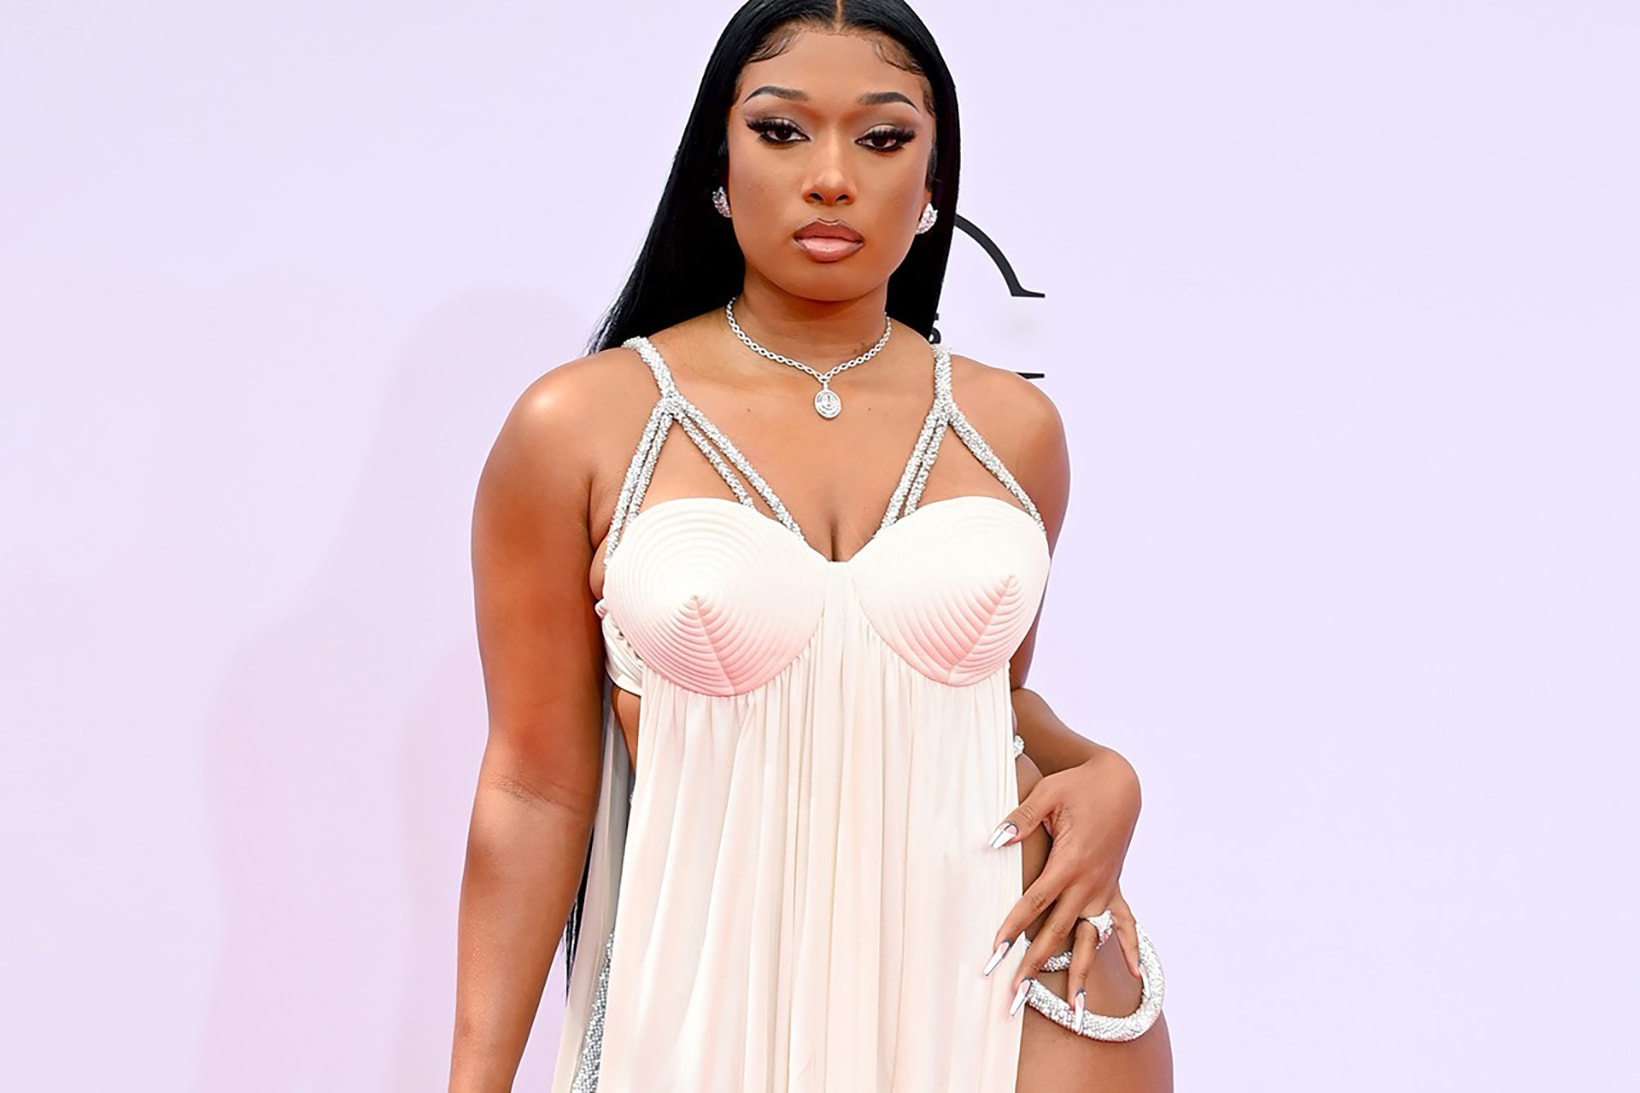 Megan Thee Stallion Rapper Artist Performer Fucking Identical Twins A24 Movie Musical Comedy 